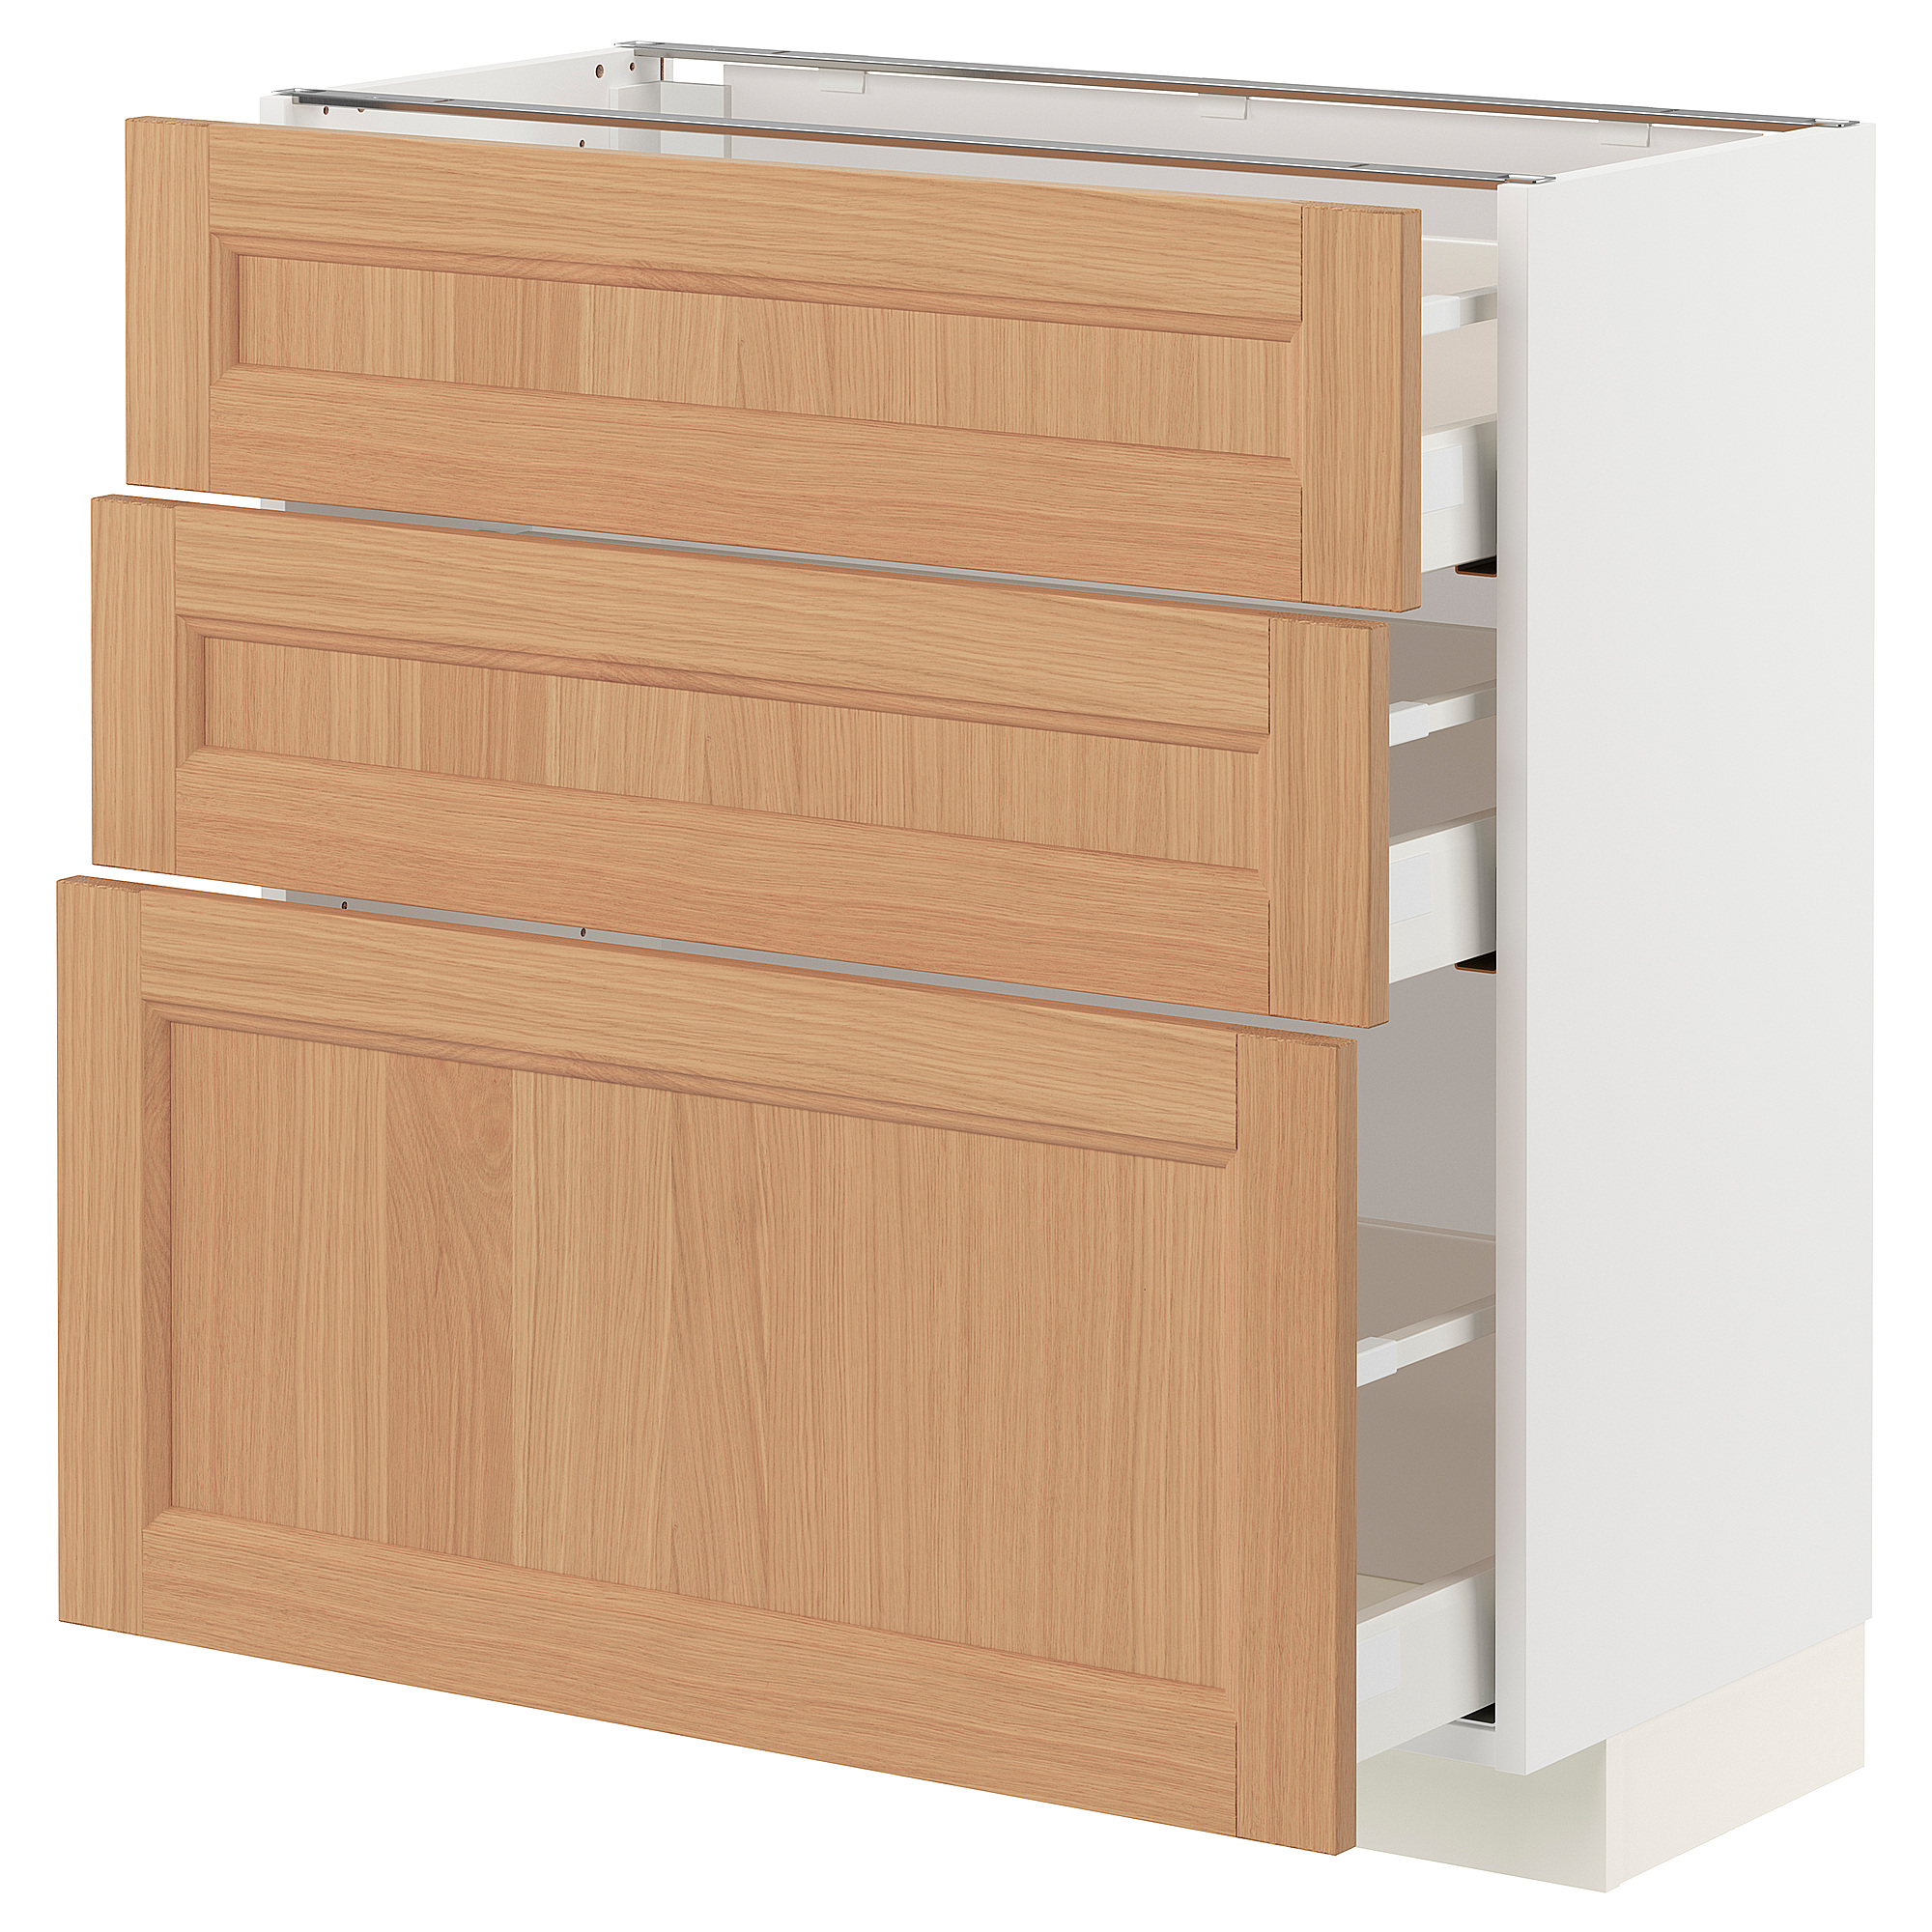 METOD/MAXIMERA base cabinet with 3 drawers